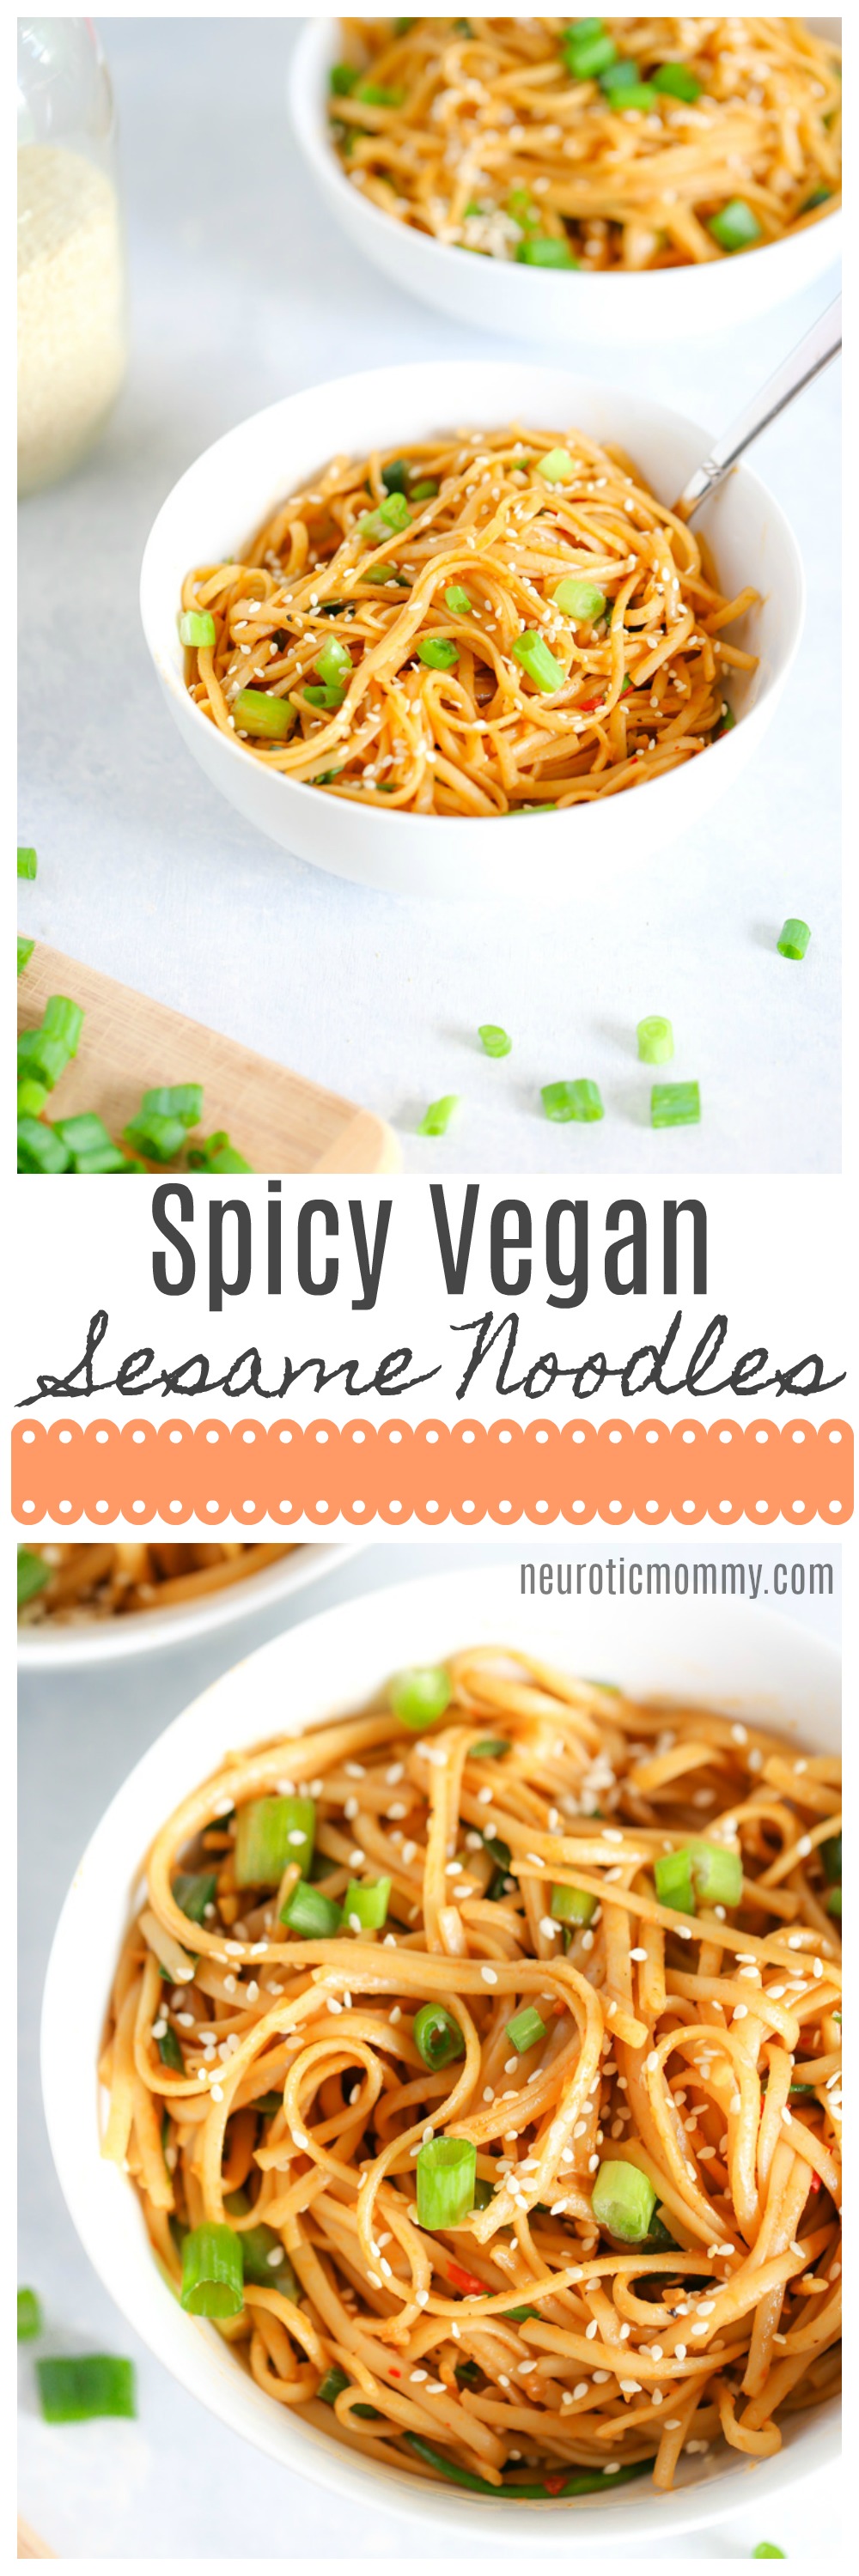 Spicy Vegan Sesame Noodles - An easy to make weeknight dinner made with a pasta or noodle of choice and some easy to put together spices. Can be made non spicy for less hotness. NeuroticMommy.com #veganrecipes #sesamenoodles #easydinners